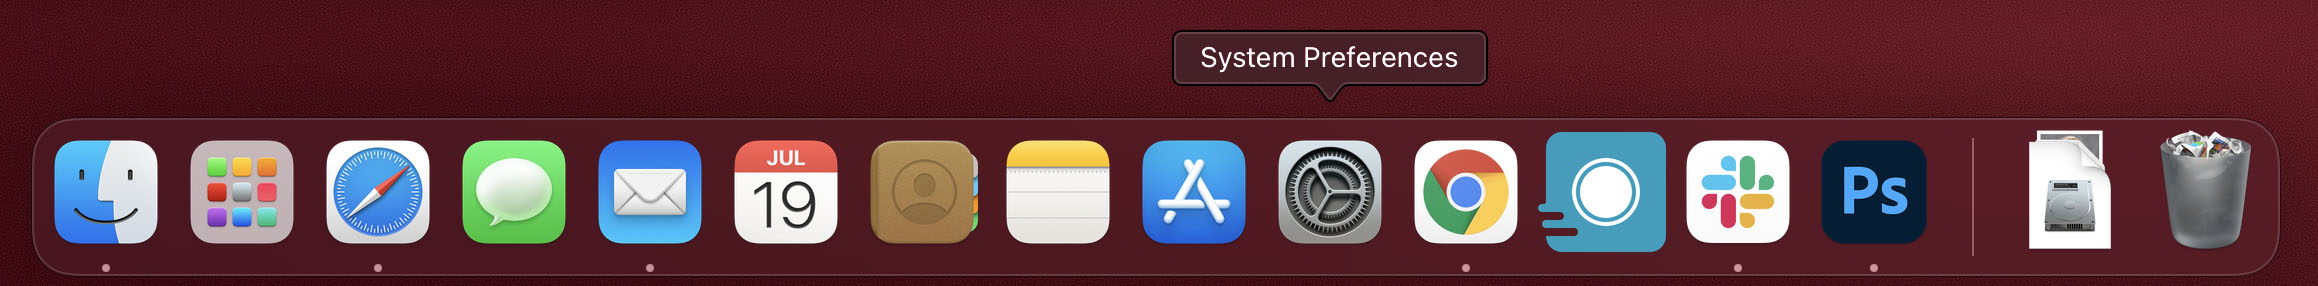 system preferences app icon